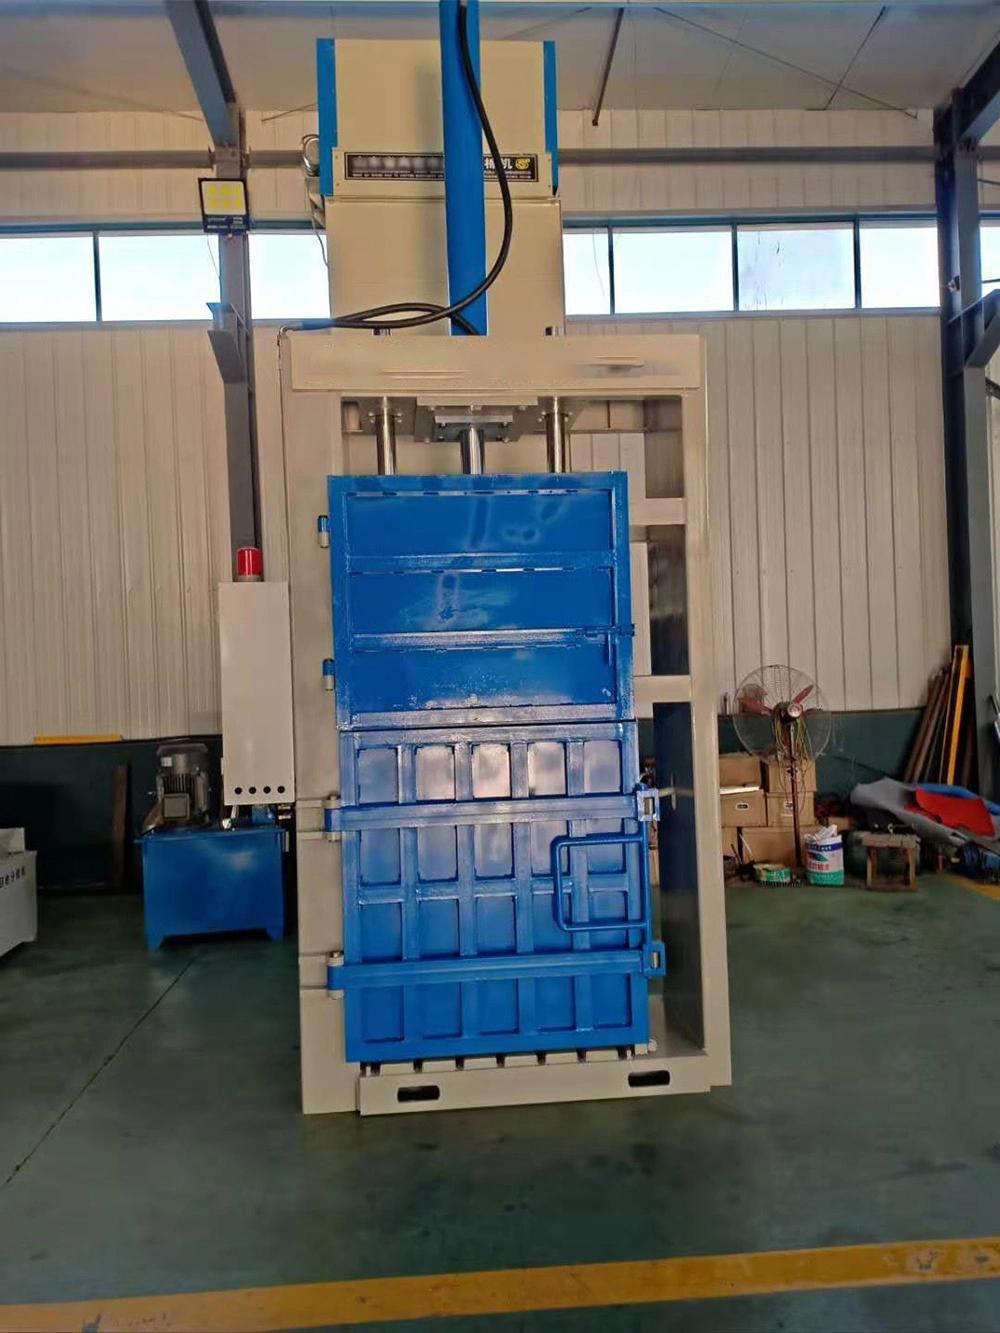 Hot Selling Automatic Hydraulic Baler with Fast Speed, Baler